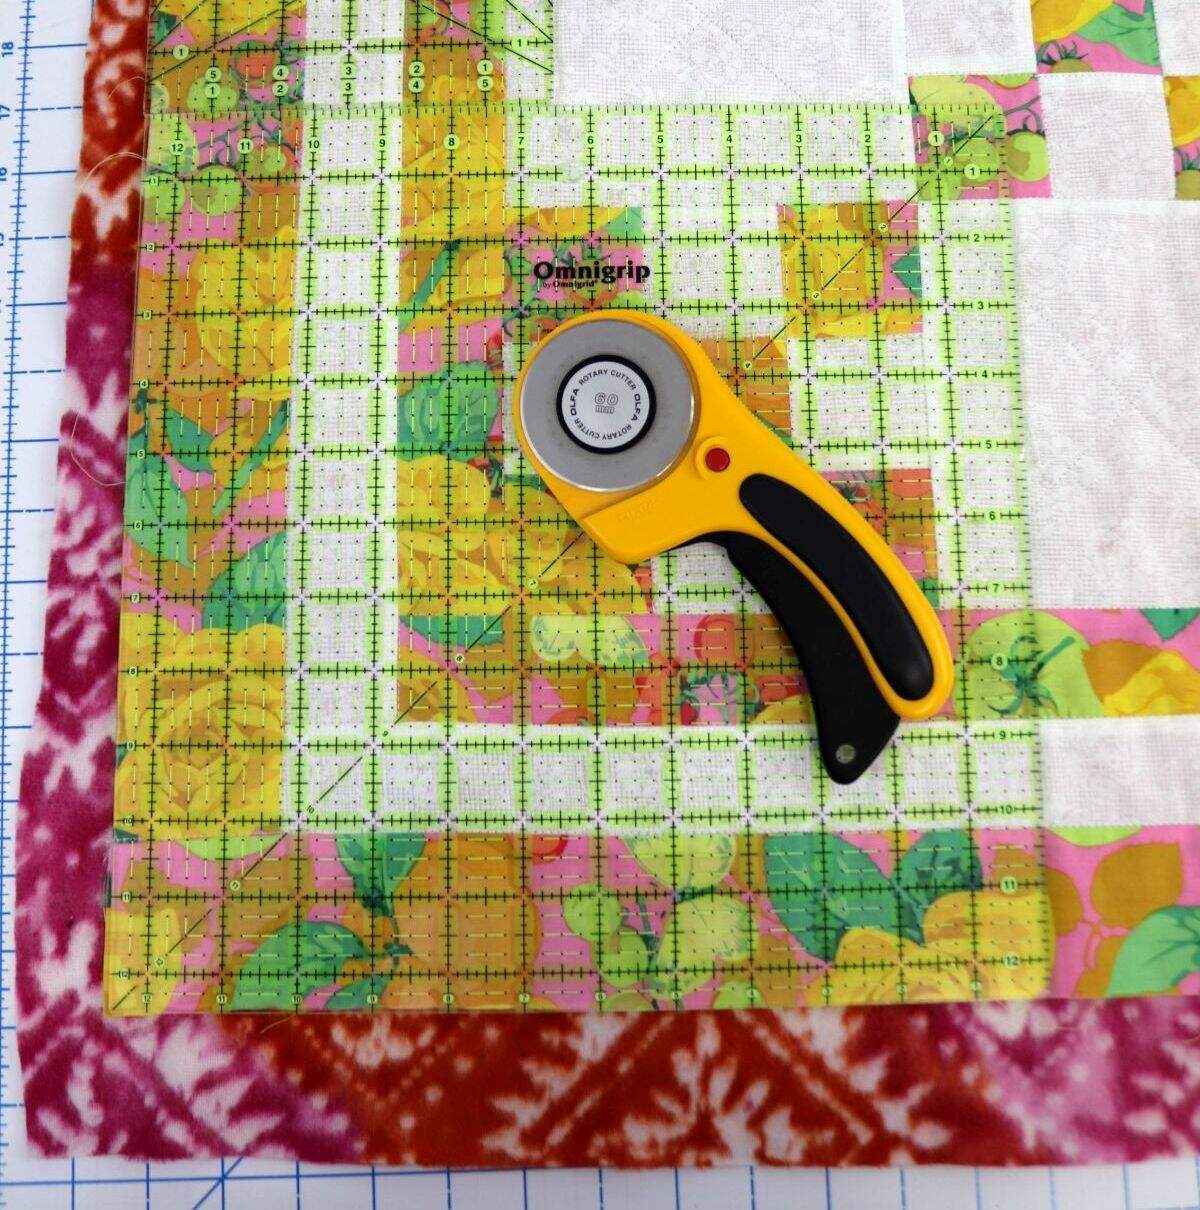 Learn how to square up the quilt layers so your quilt will look right after binding. Video tutorial by The Crafty Gemini. #squareupquilt, #quilting, #squareupaquilttop